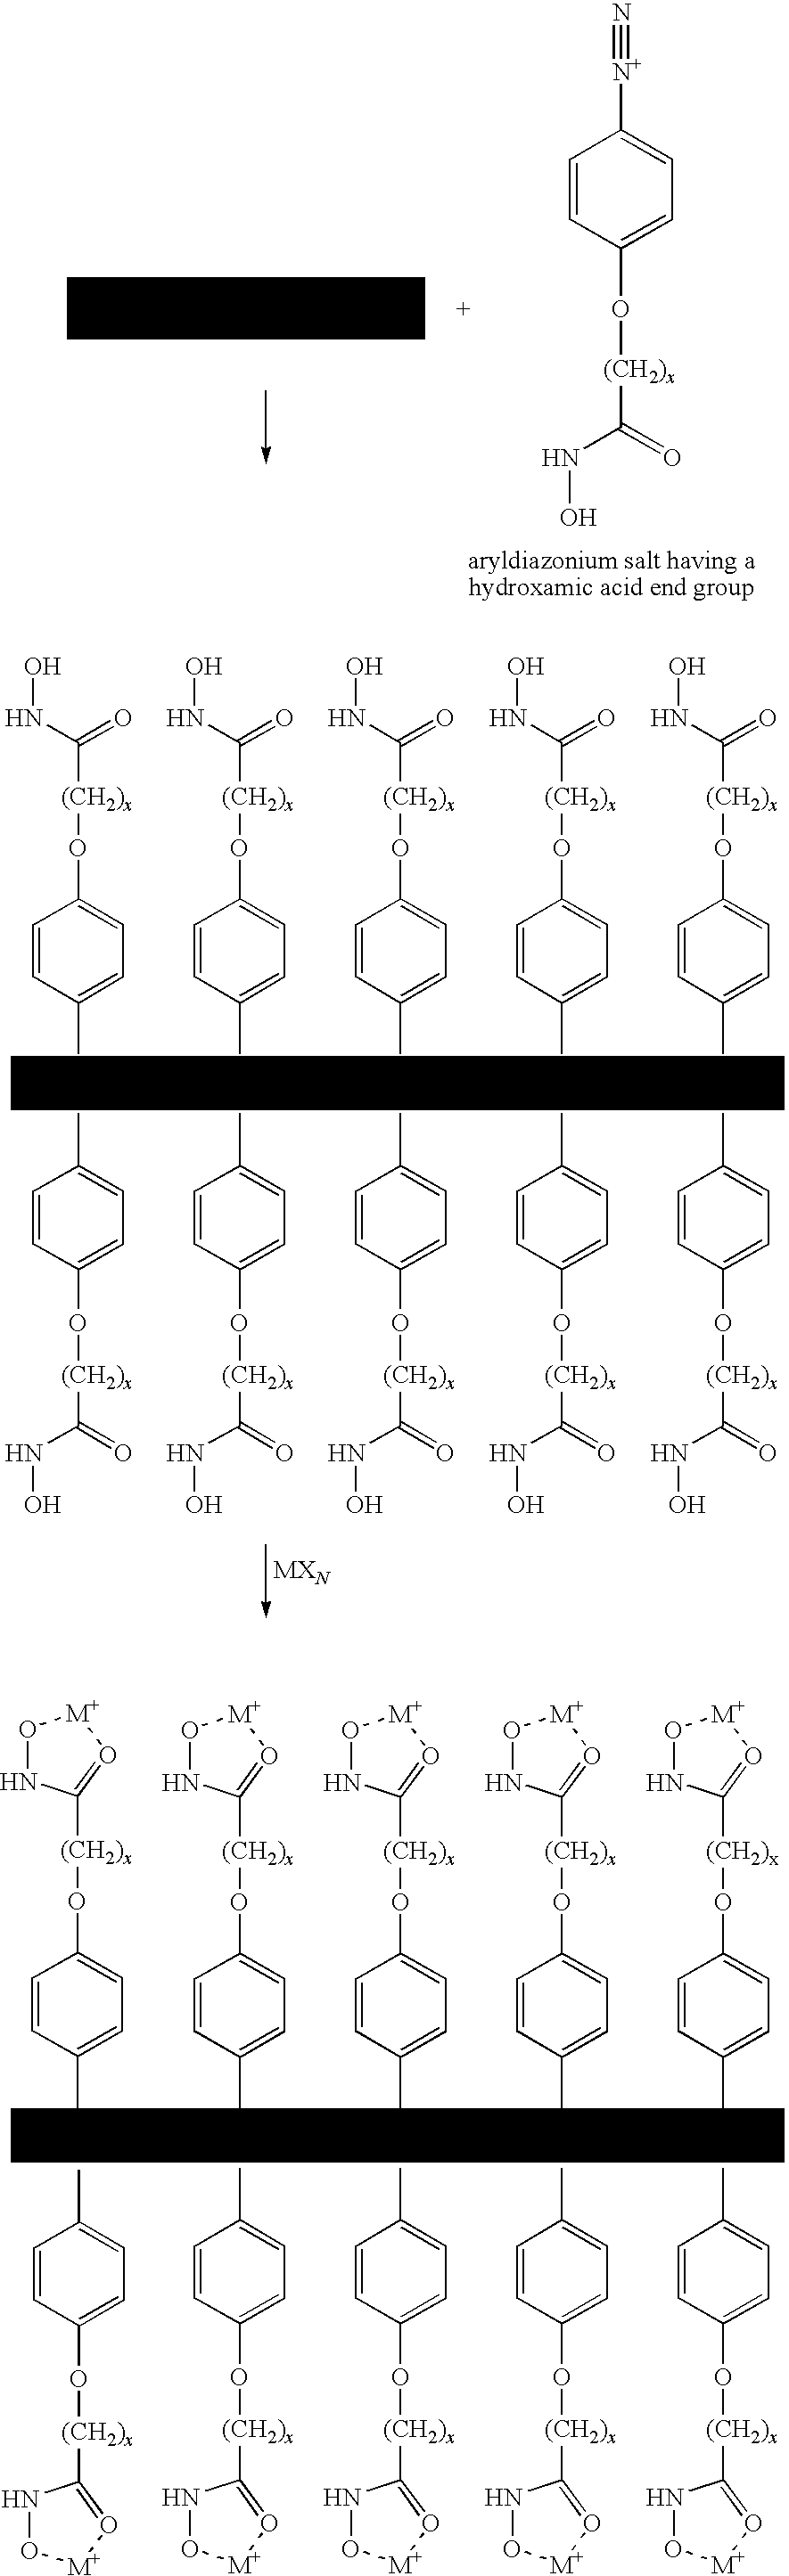 Methods for separating carbon nanotubes by enhancing the density differential